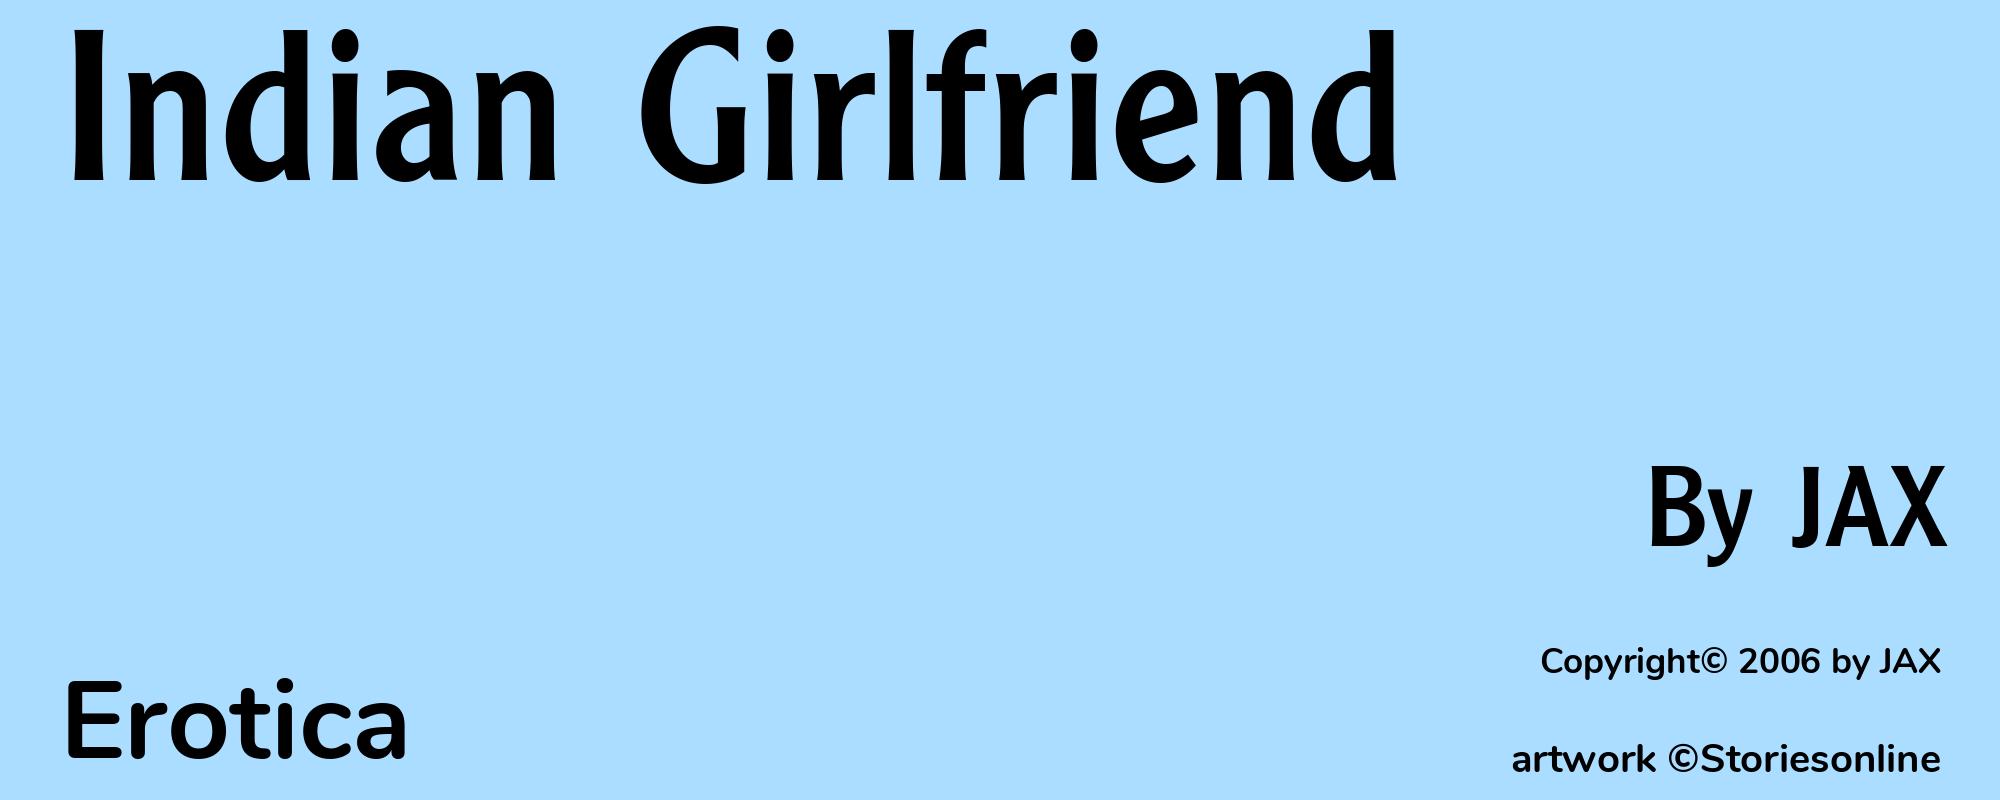 Indian Girlfriend - Cover